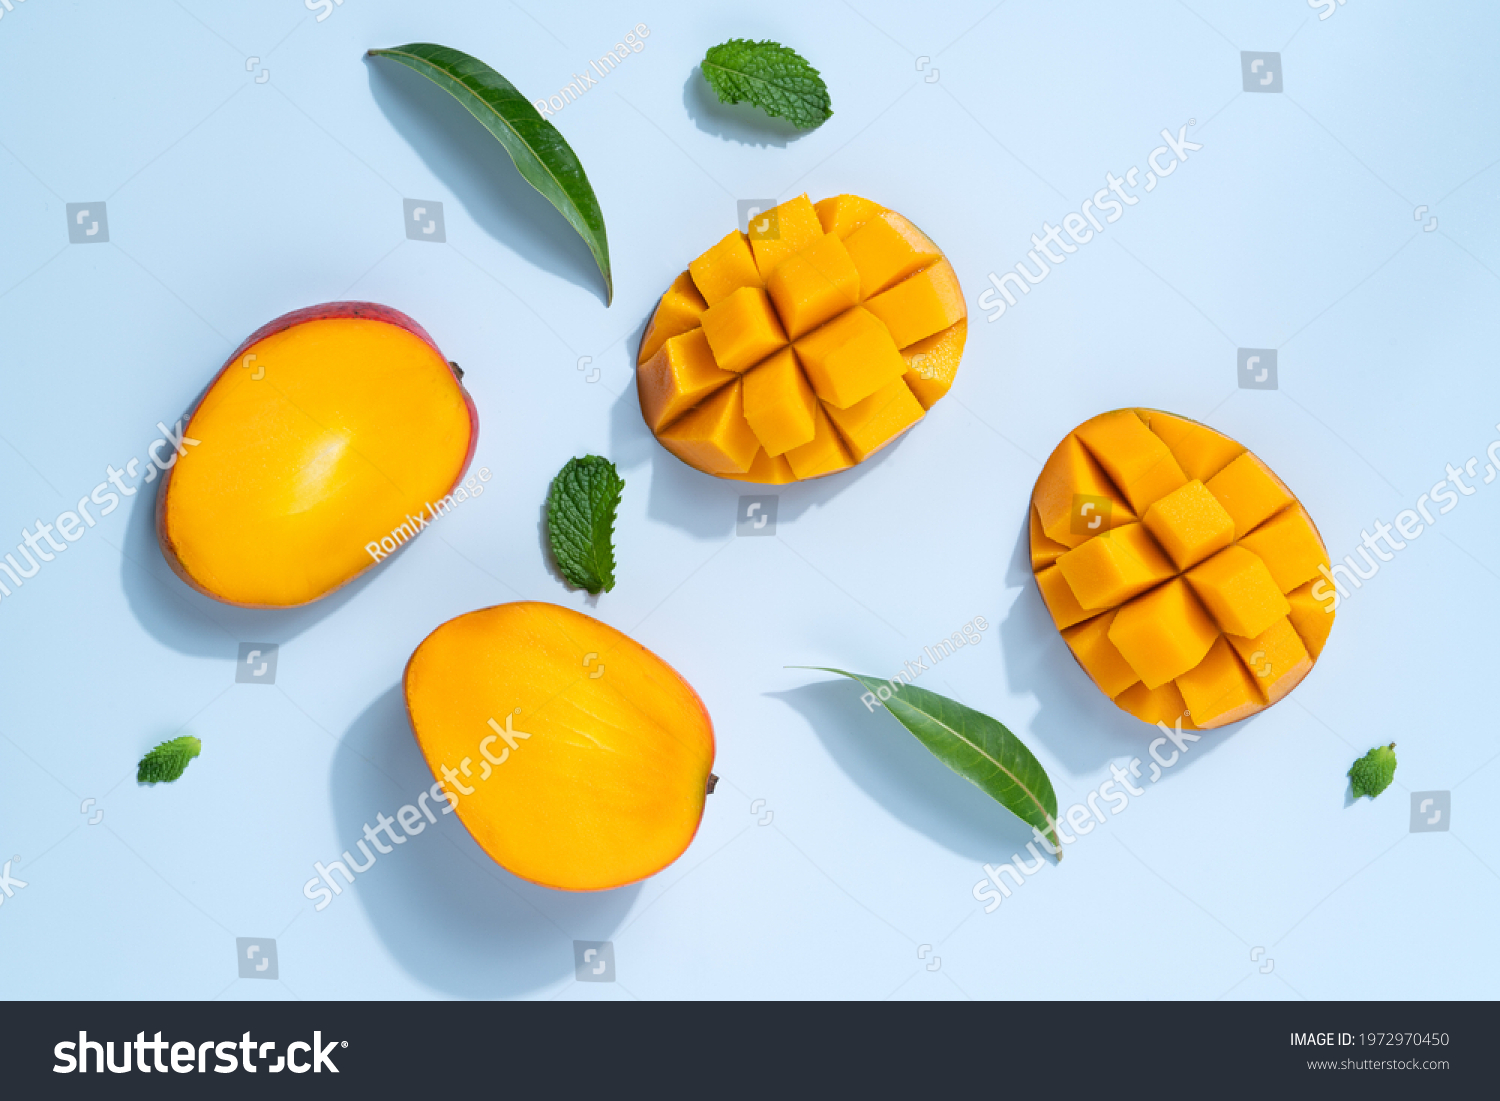 Mango design concept. Top view of diced fresh mango fruit pattern on blue table background. #1972970450